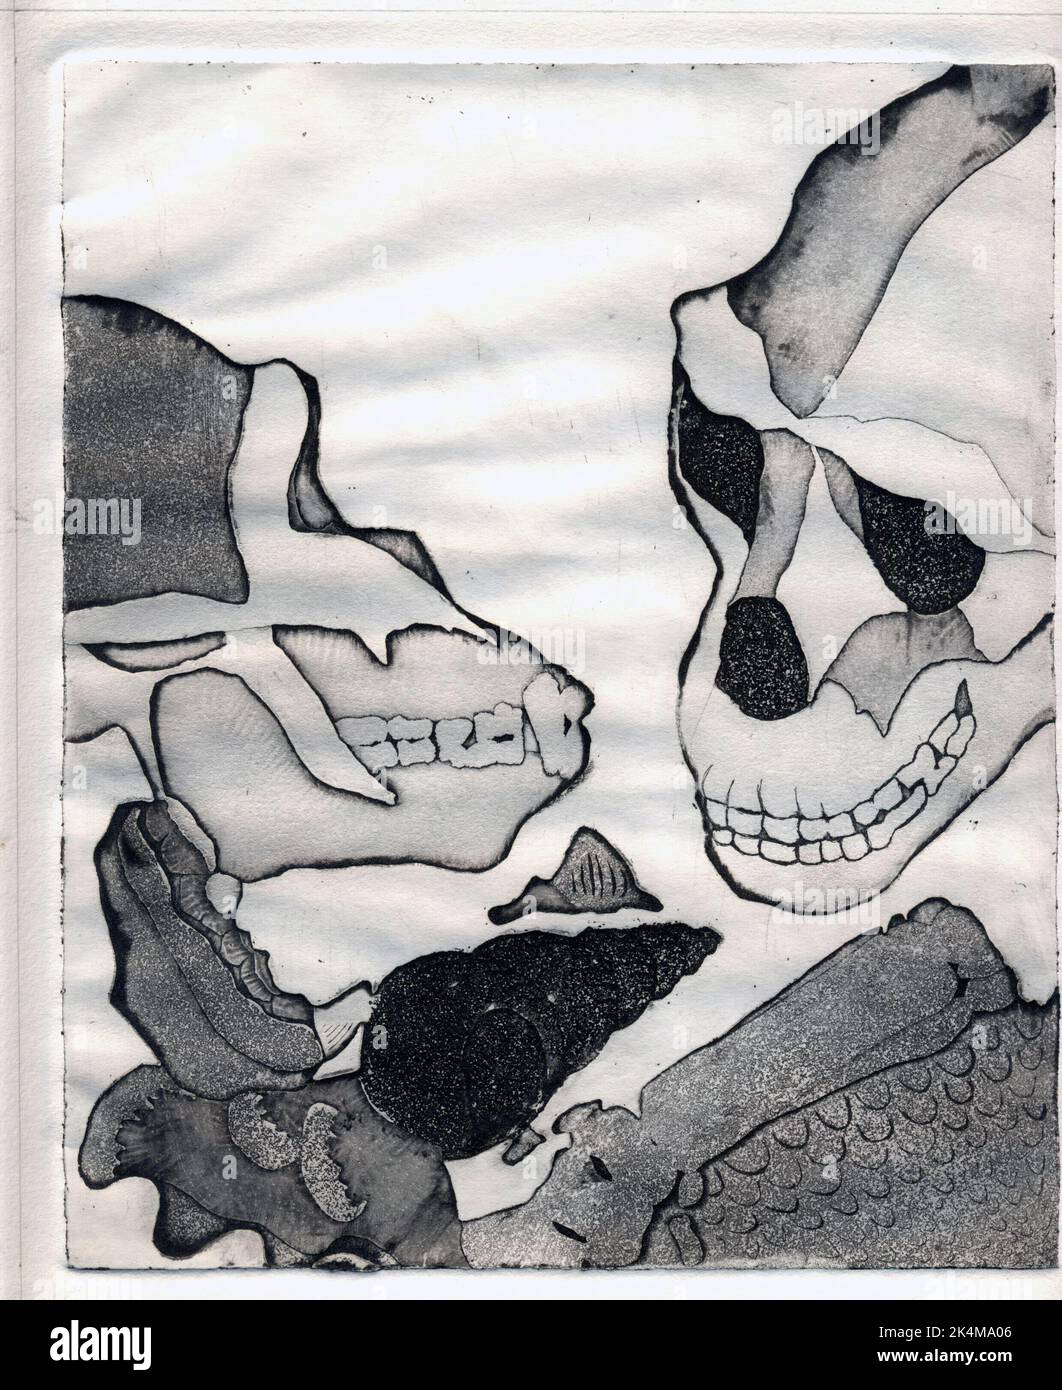 2 of 4 etchings showing two gorilla /hominid skulls, suitable for book cover, magazine art, evolution, biology, zoology, anthropology, history gothic Stock Photo